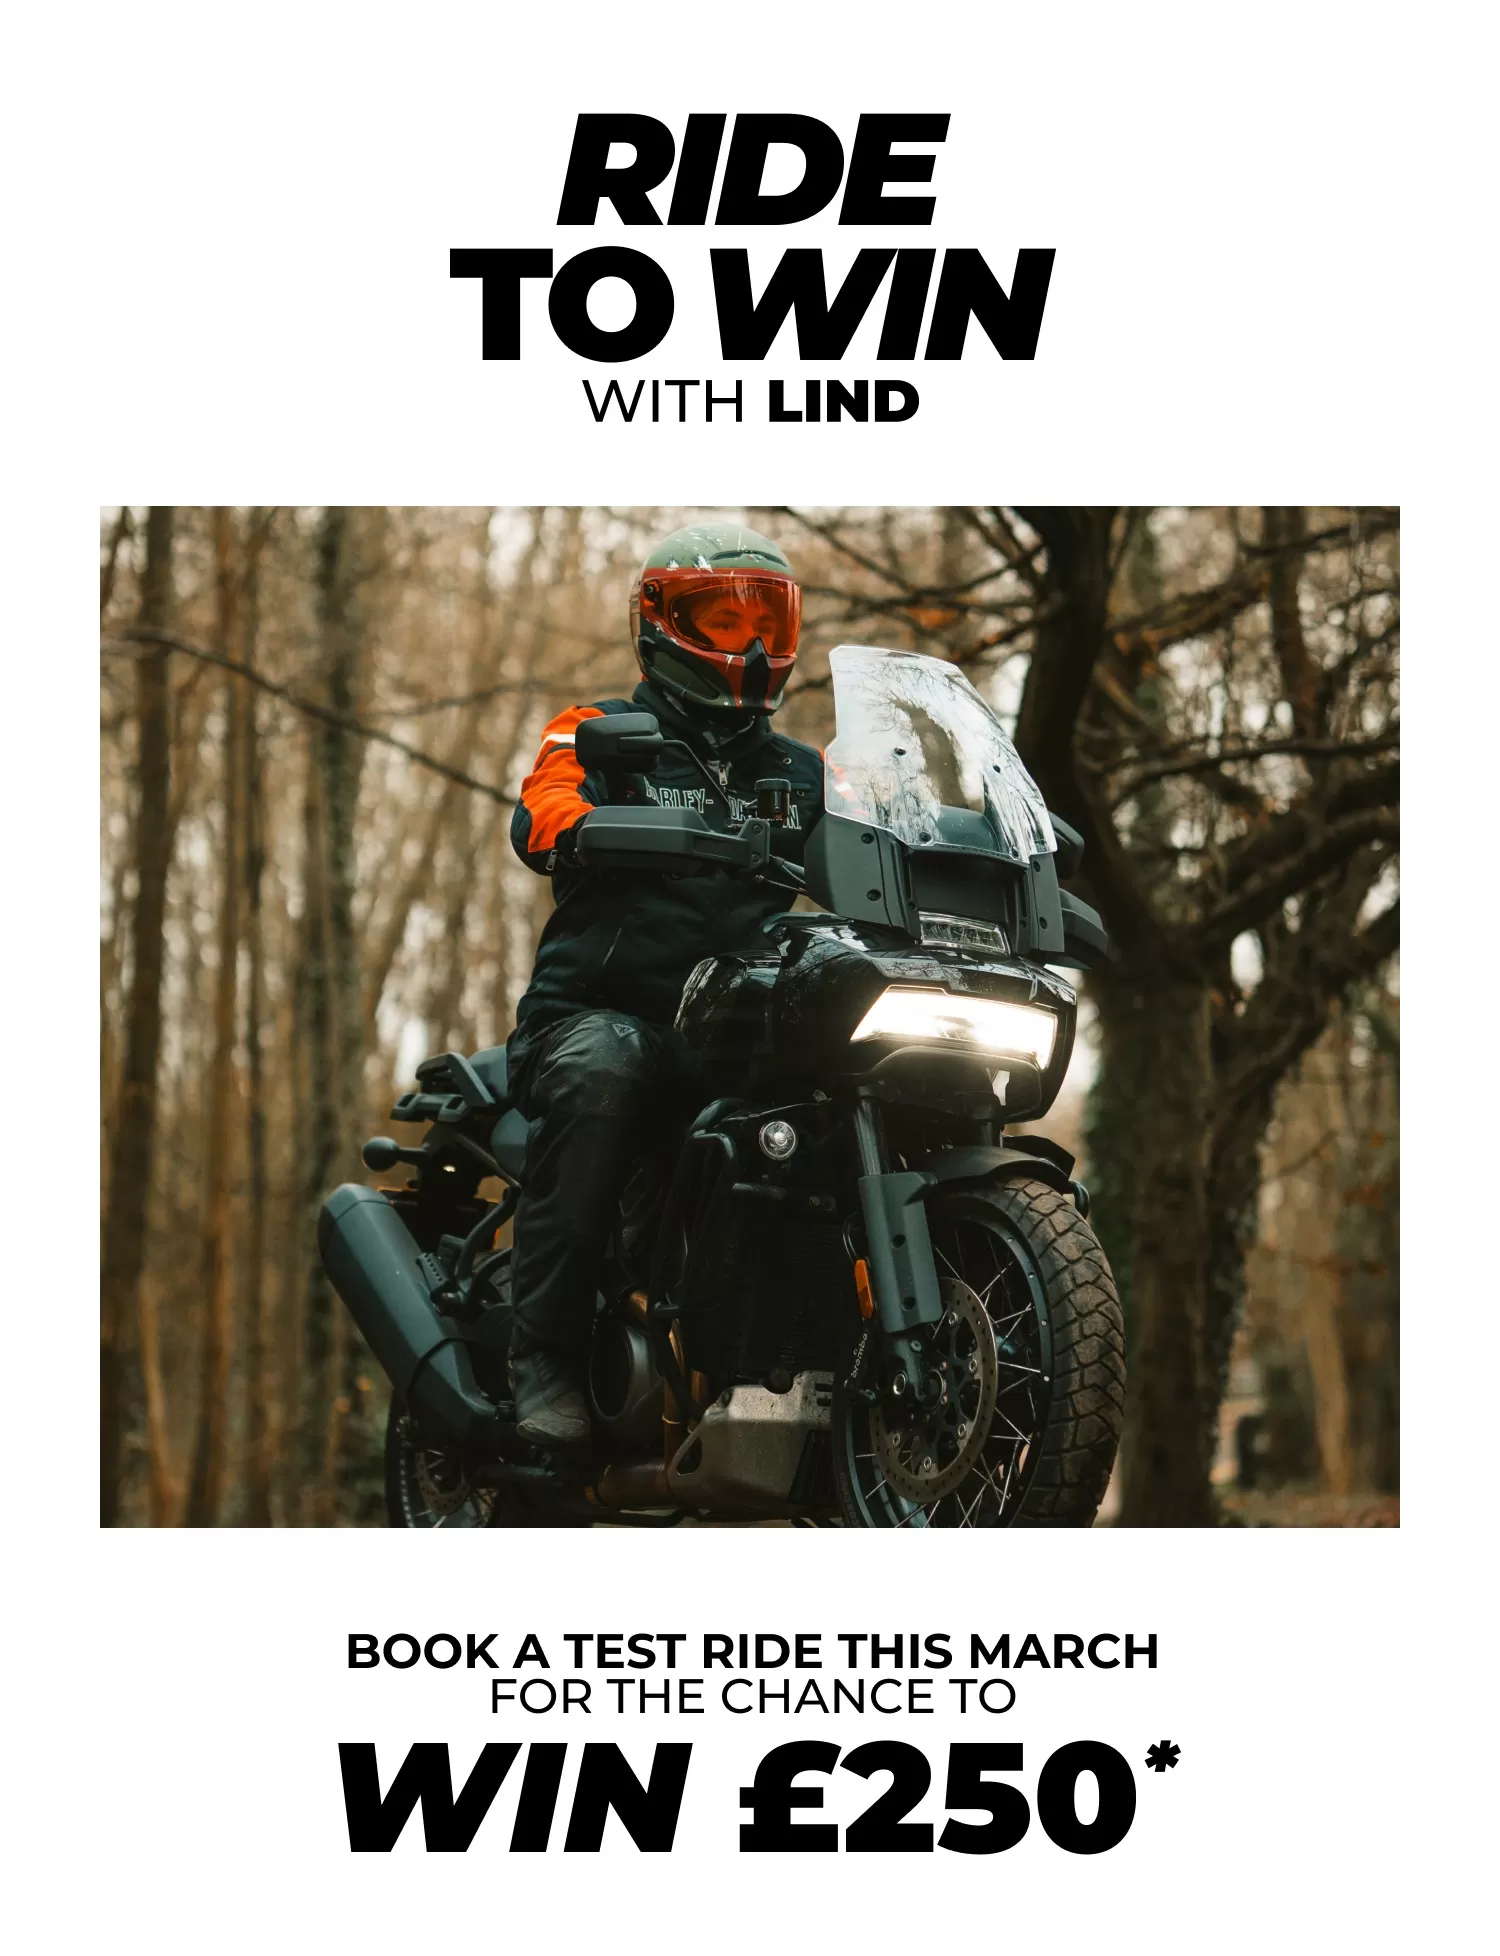 Motorcycle test ride to win £250